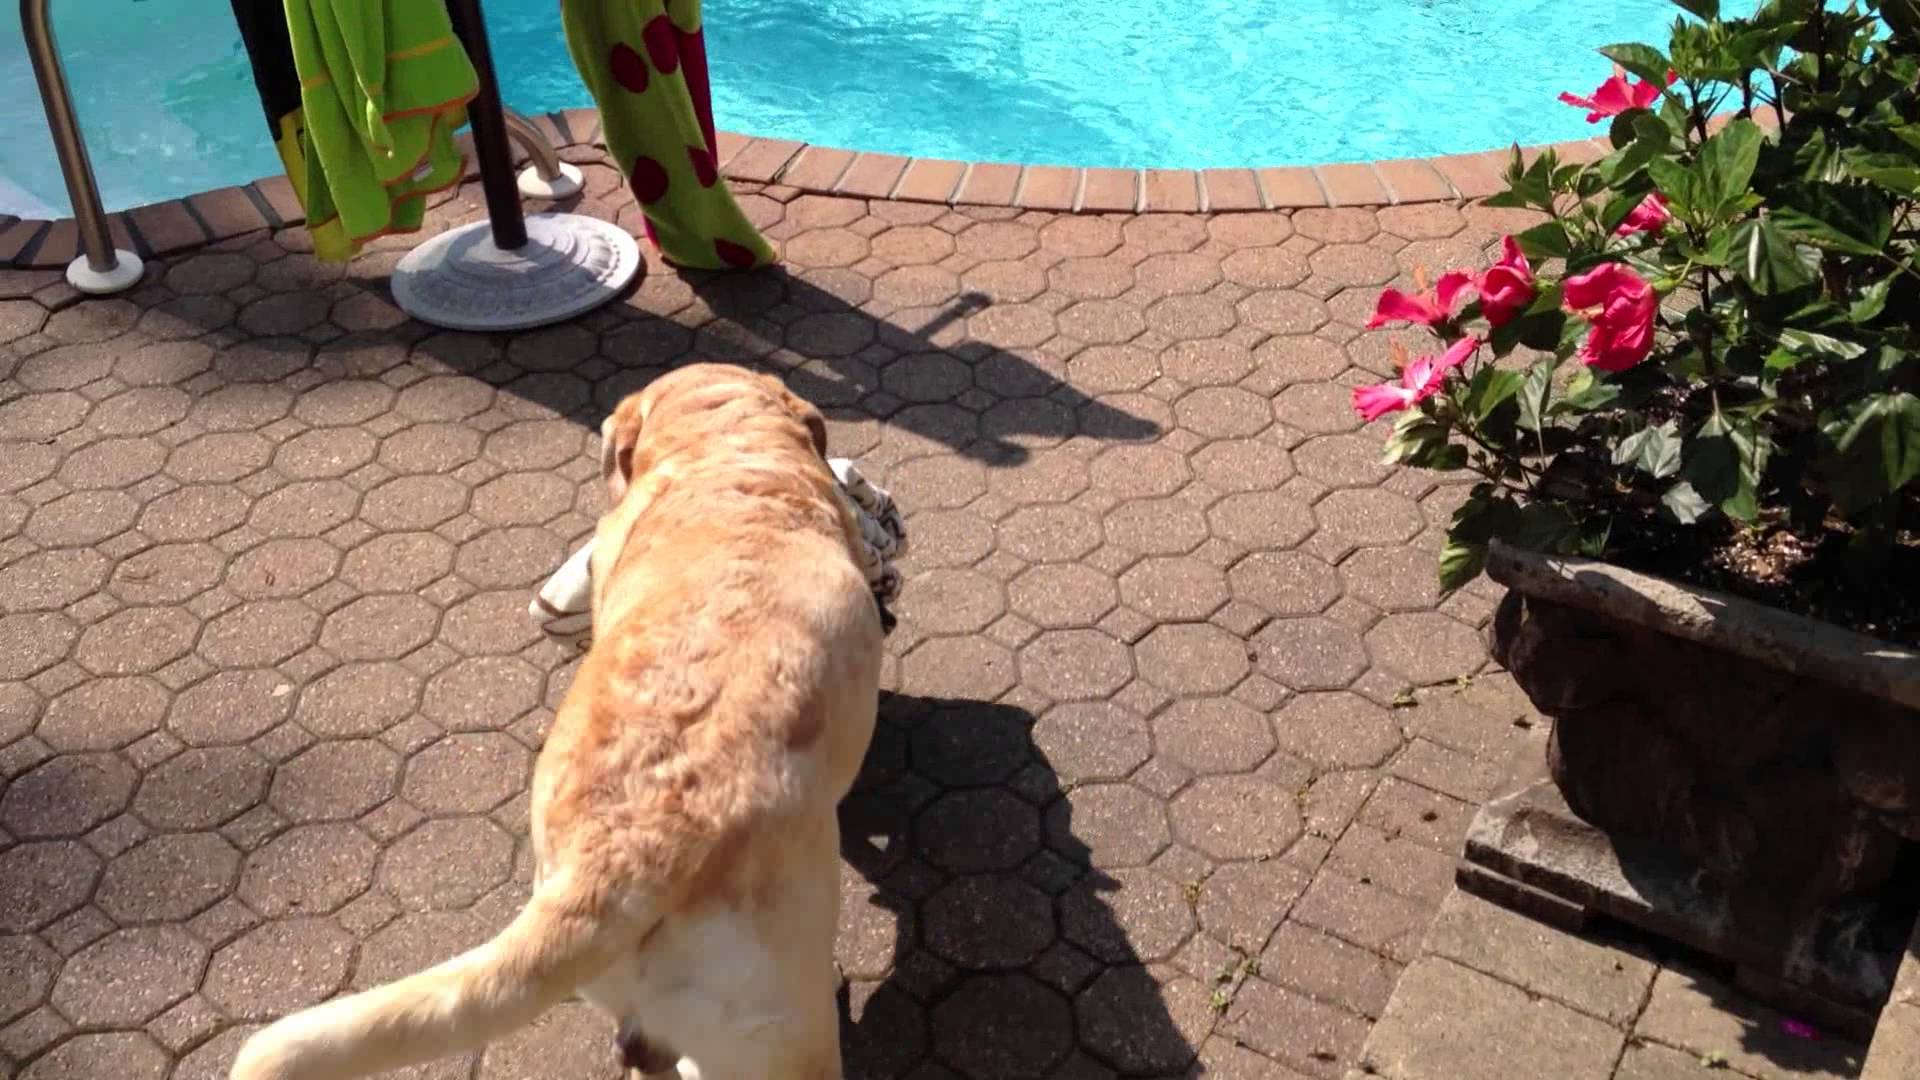 Labrador Gets His Towel From The Closet Before Jumping In The Pool